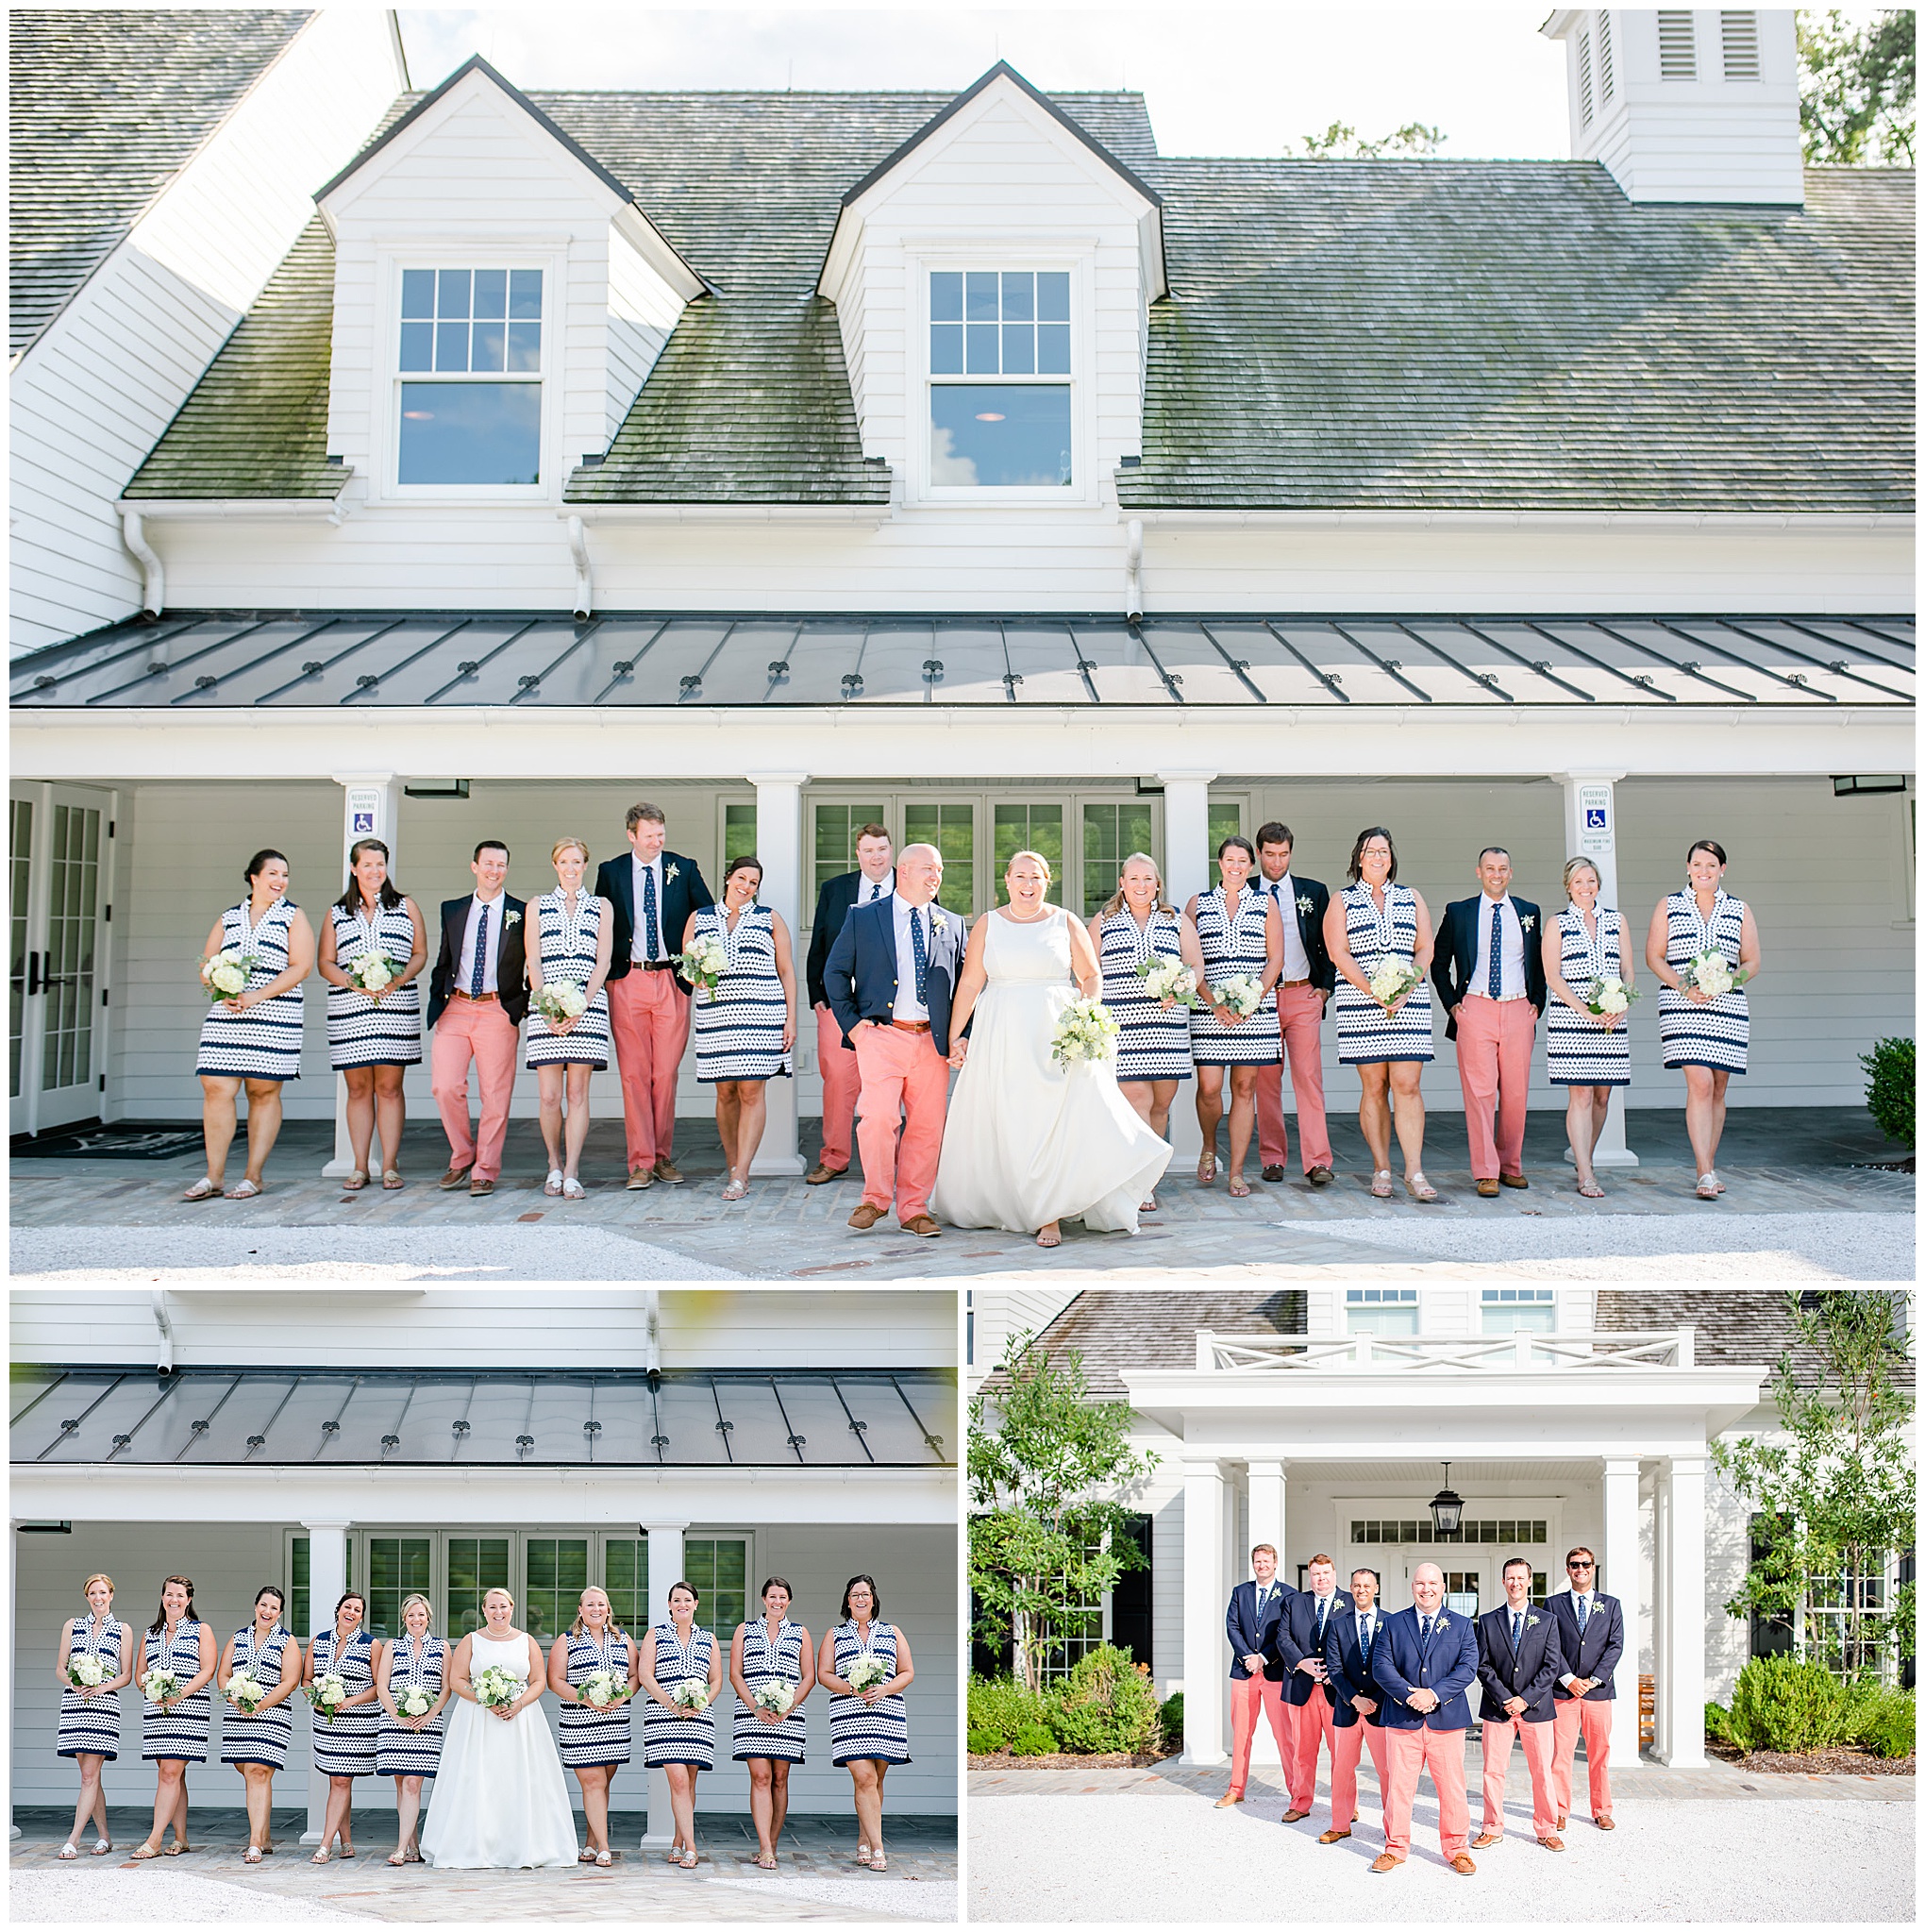 Nantucket inspired Gibson Island Club wedding, nautical wedding inspiration, Annapolitan wedding inspiration, Gibson Island Club wedding photography, Gibson Island Club wedding photographer, Annapolis wedding photographer, Baltimore wedding photographer, Maryland wedding photographer, nautical aesthetic, Annapolis wedding inspiration, Rachel E.H. Photography, groom with groomsmen, bride with bridesmaids, wedding party looking at bride and groom, York flowers wedding bouquet